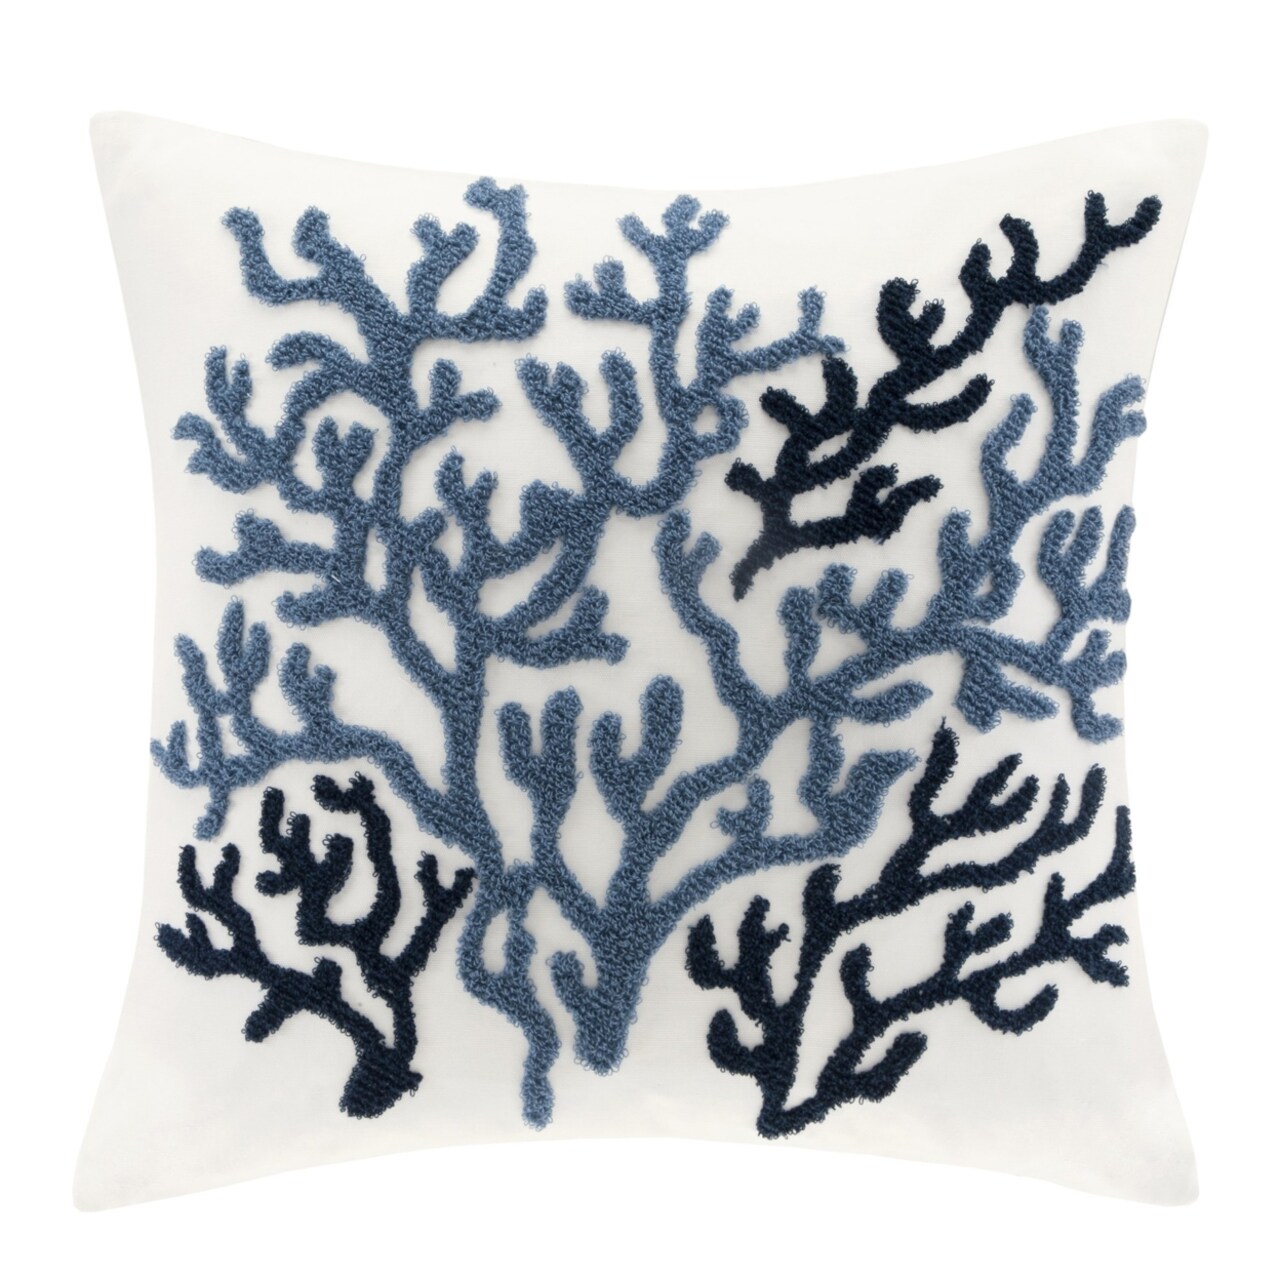 Harbor House Beach House 18-by-18-Inch Square Decorative Pillow, Blue